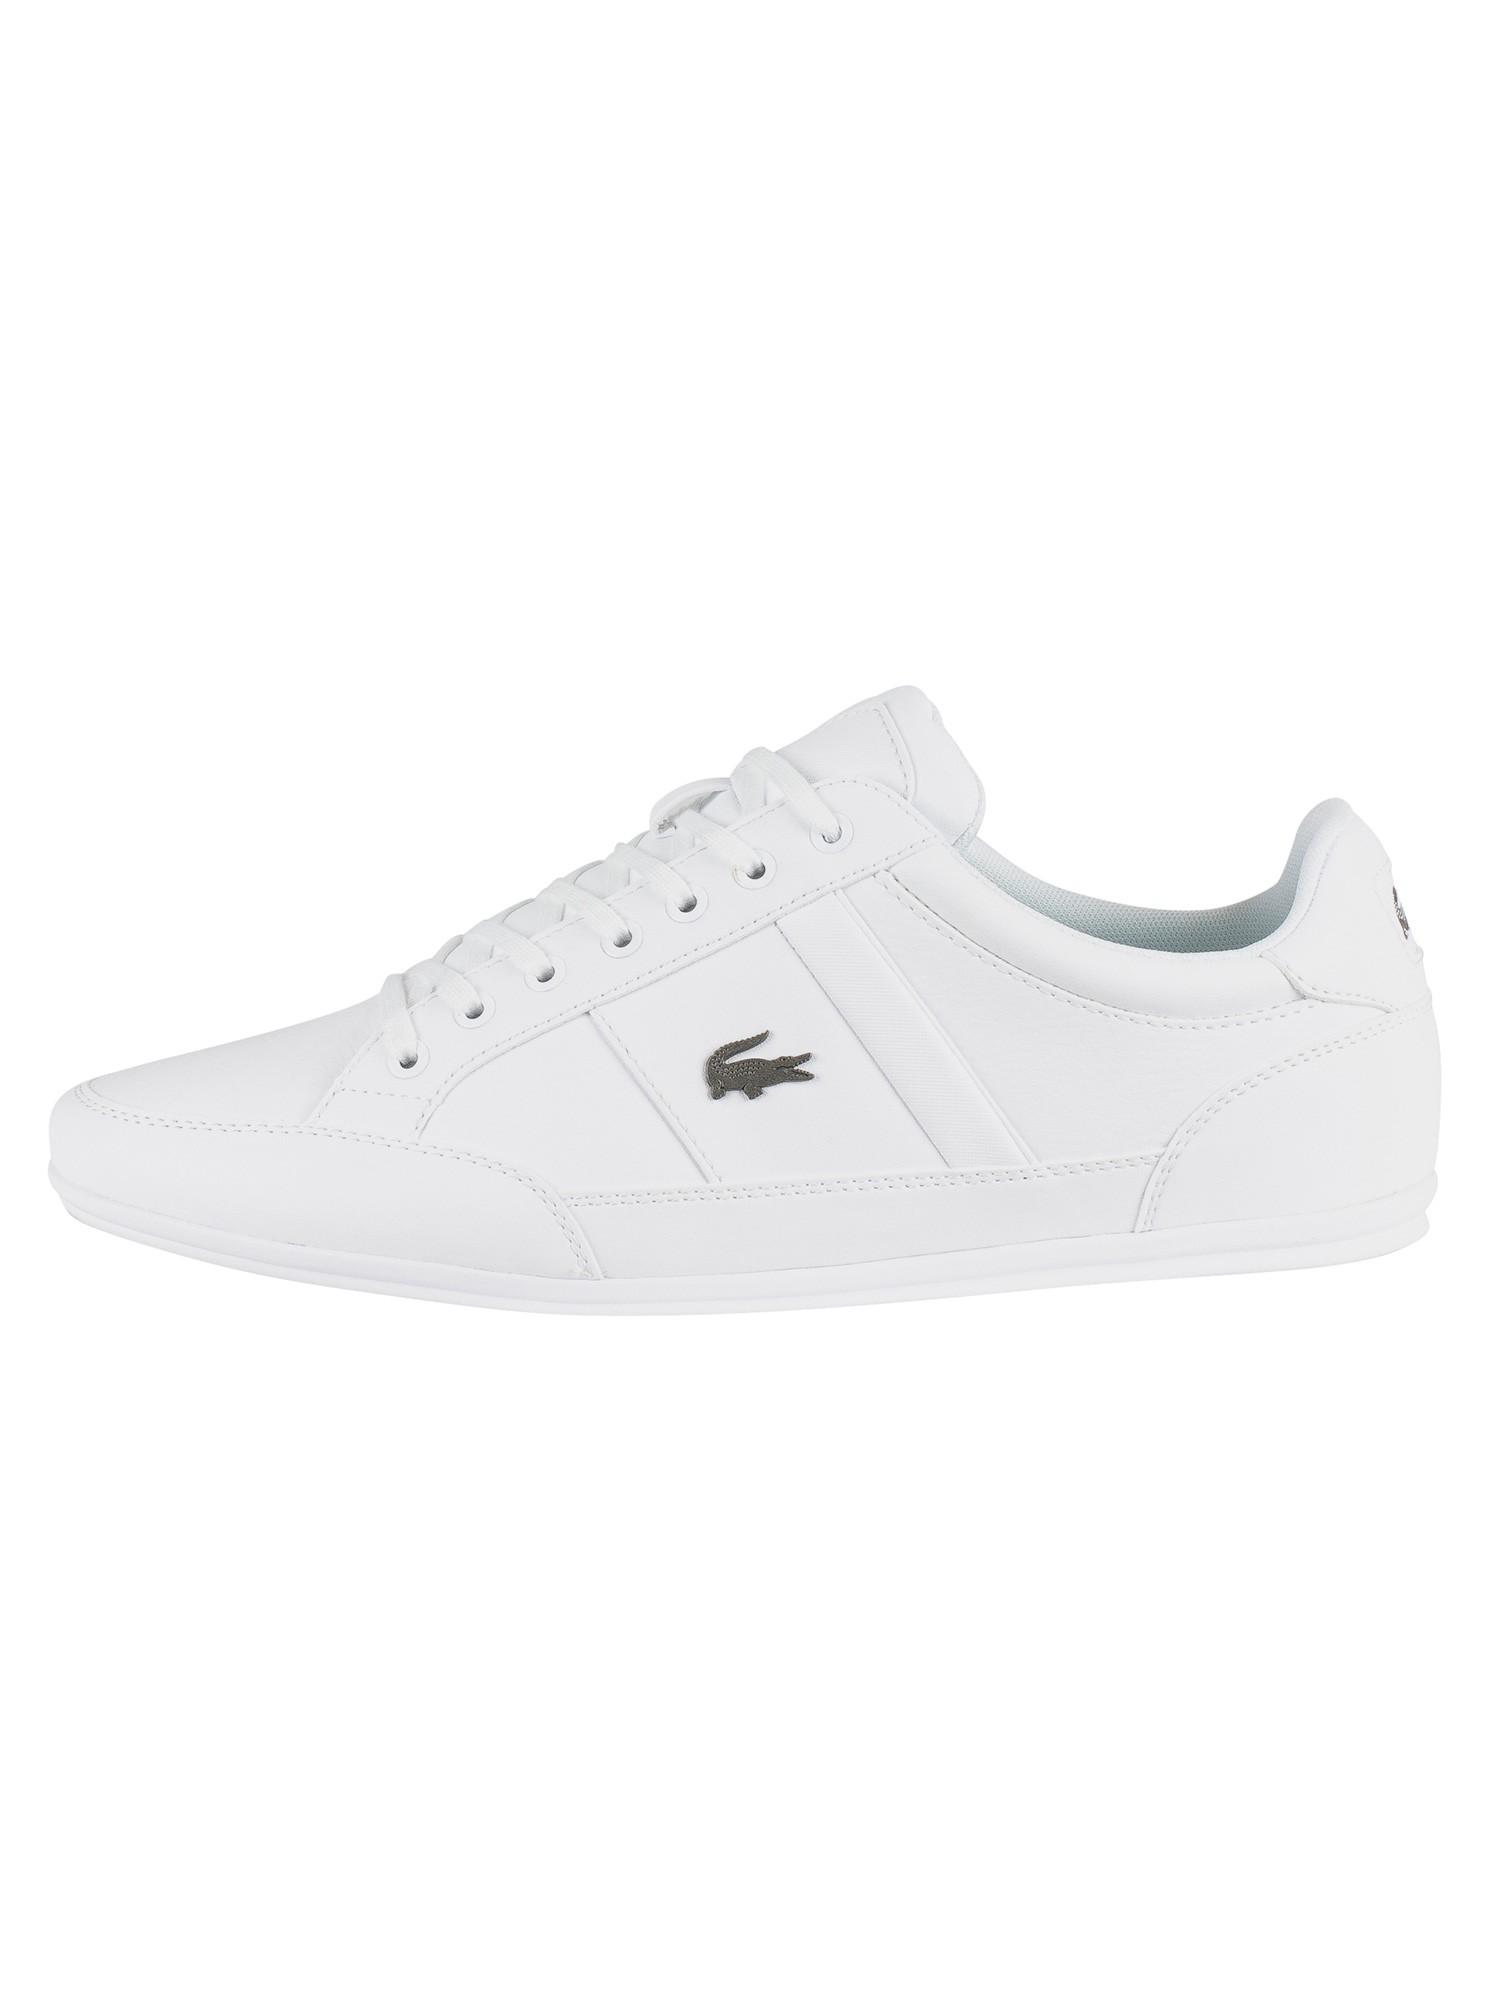 Lacoste Chaymon Bl 1 Cma Leather Trainers in White/White (White) for Men -  Lyst